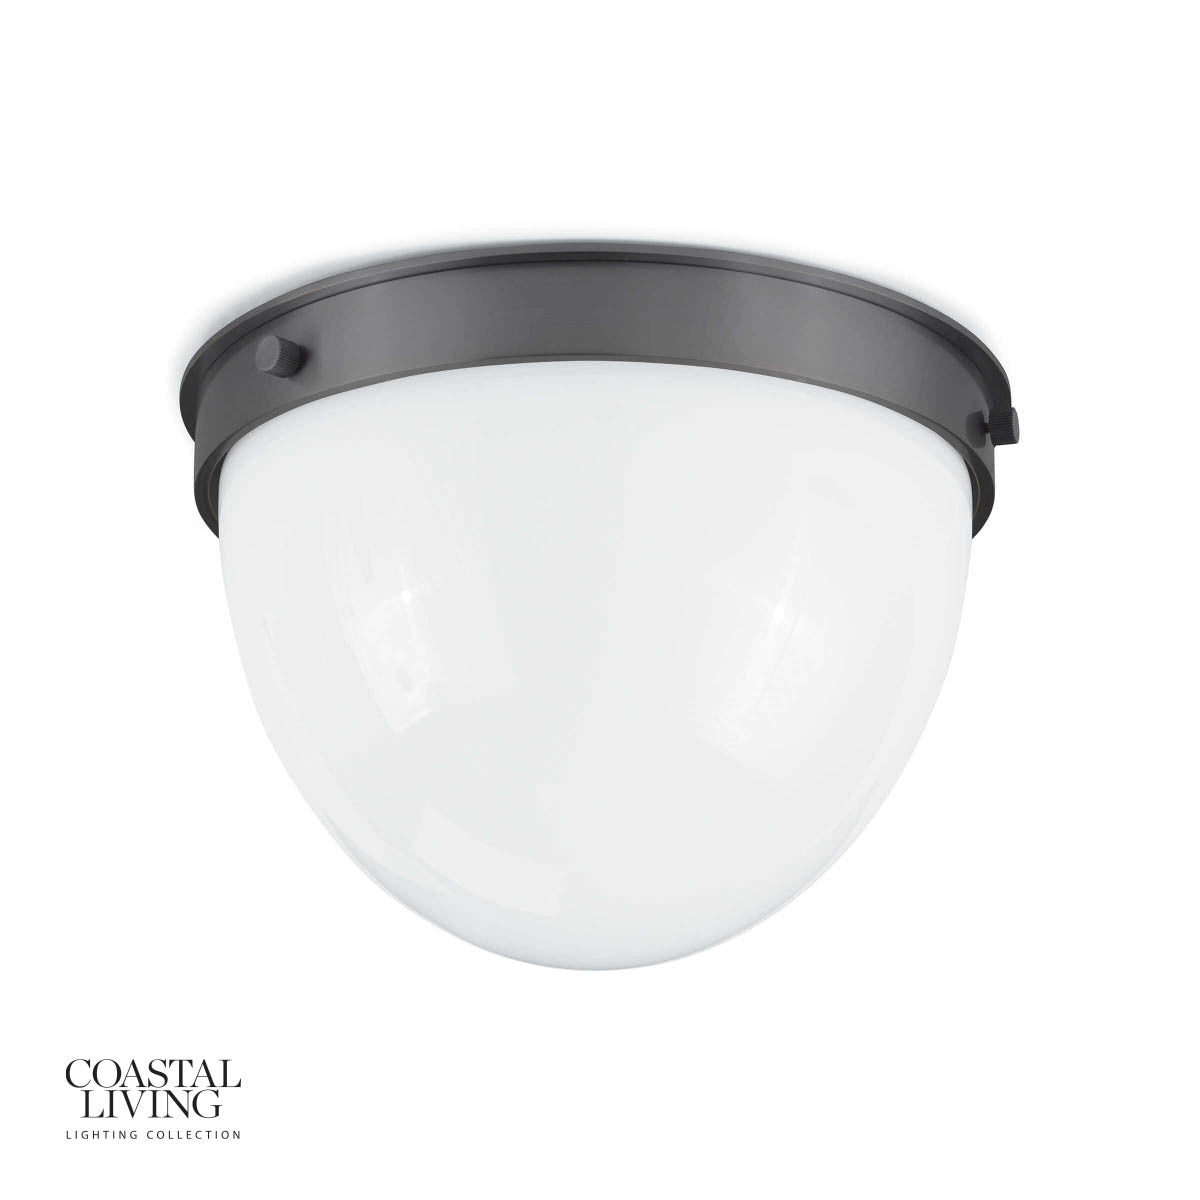 We love the warm and glowing look the white opal glass gives when illuminated in this Bay Harbor Oil Rubbed Bronze Flush Mount. This would look stunning in areas with lower ceilings or in hallways.   Size: 11"w x 11"d x 7.5"h Material: Steel